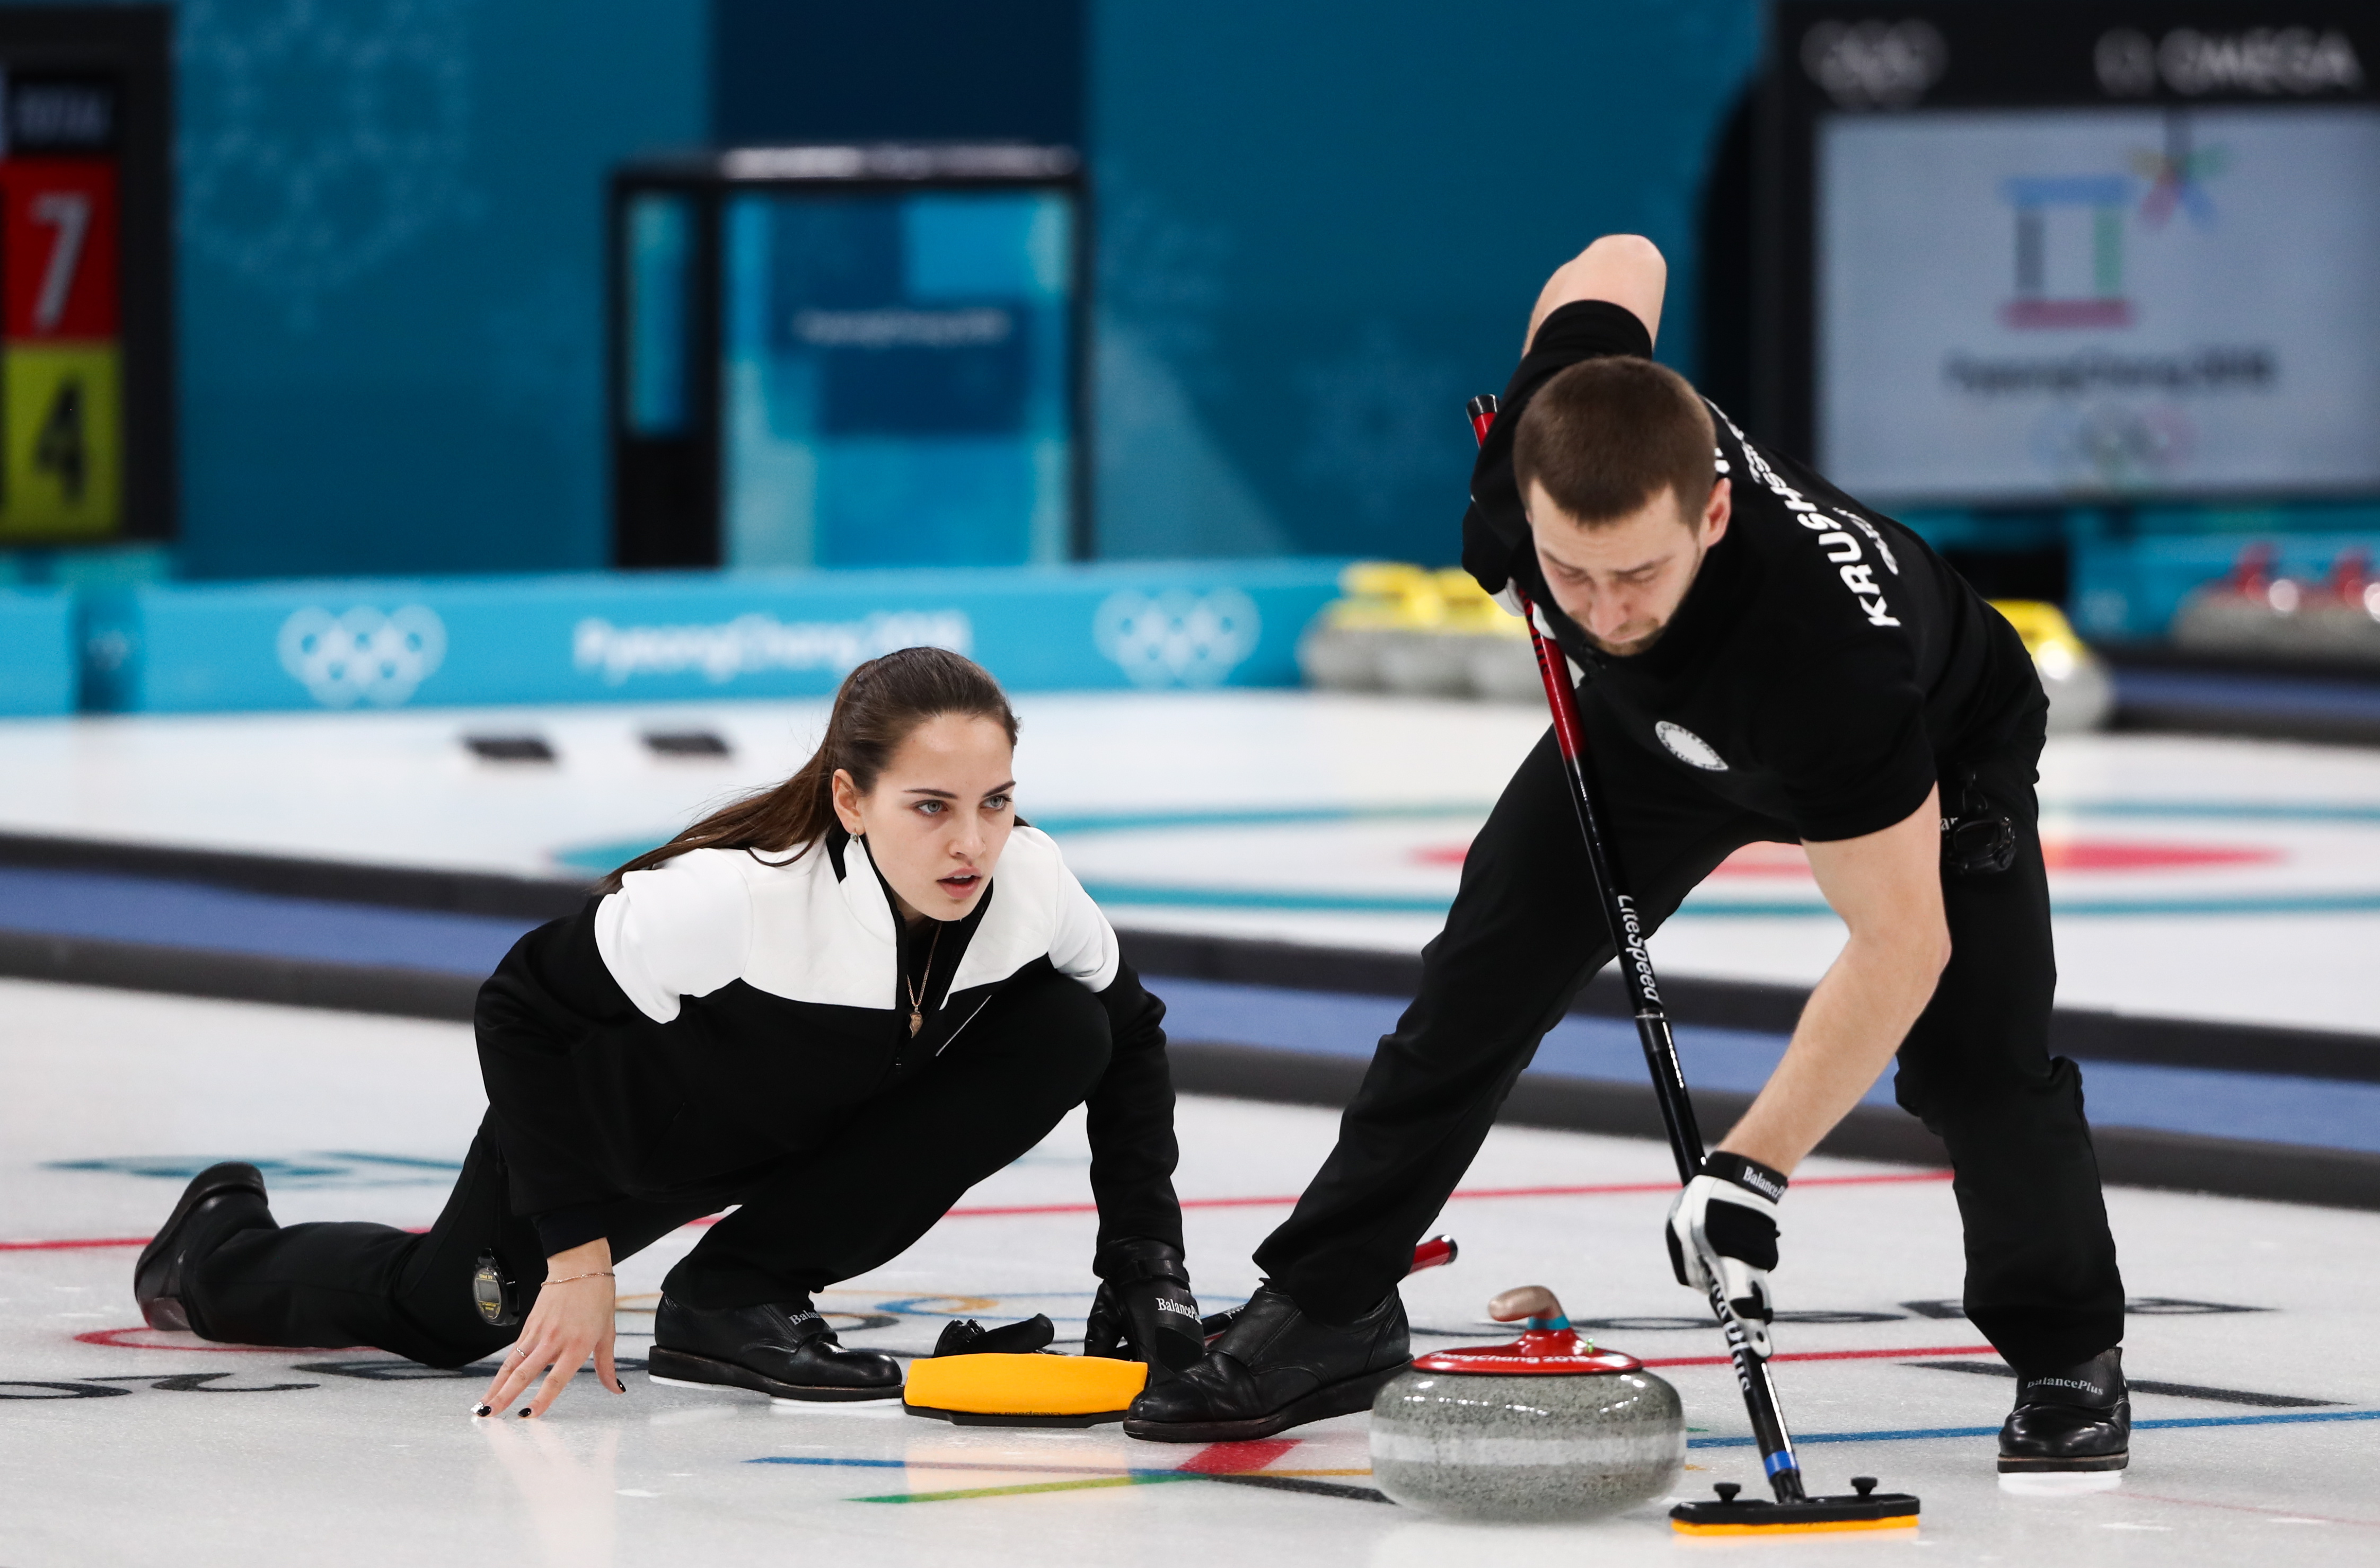 Russias OAR Olympics Curling Team Faces Doping Scandal Time